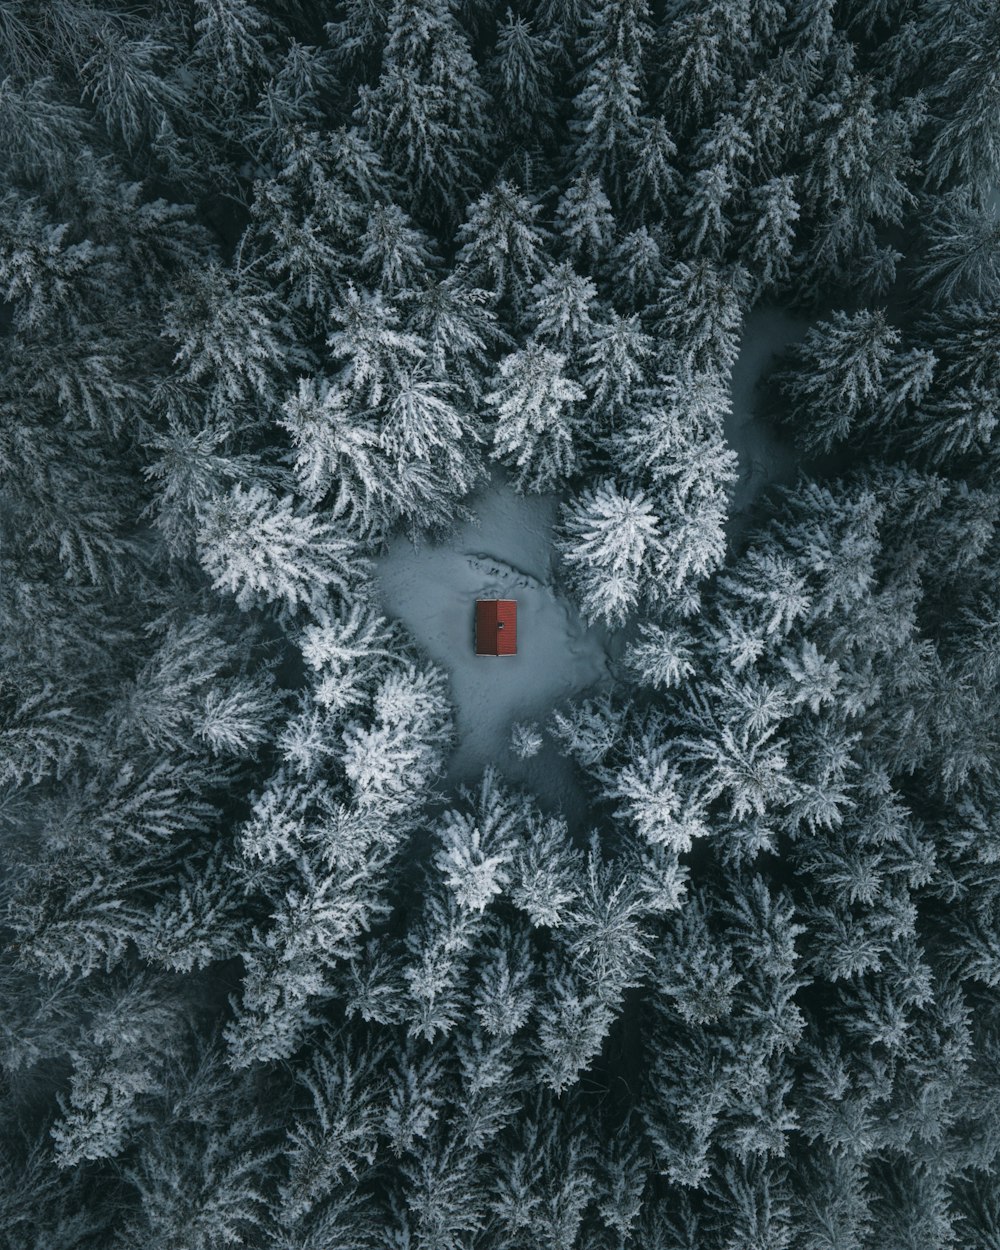 an aerial view of a tree with a red square in the center